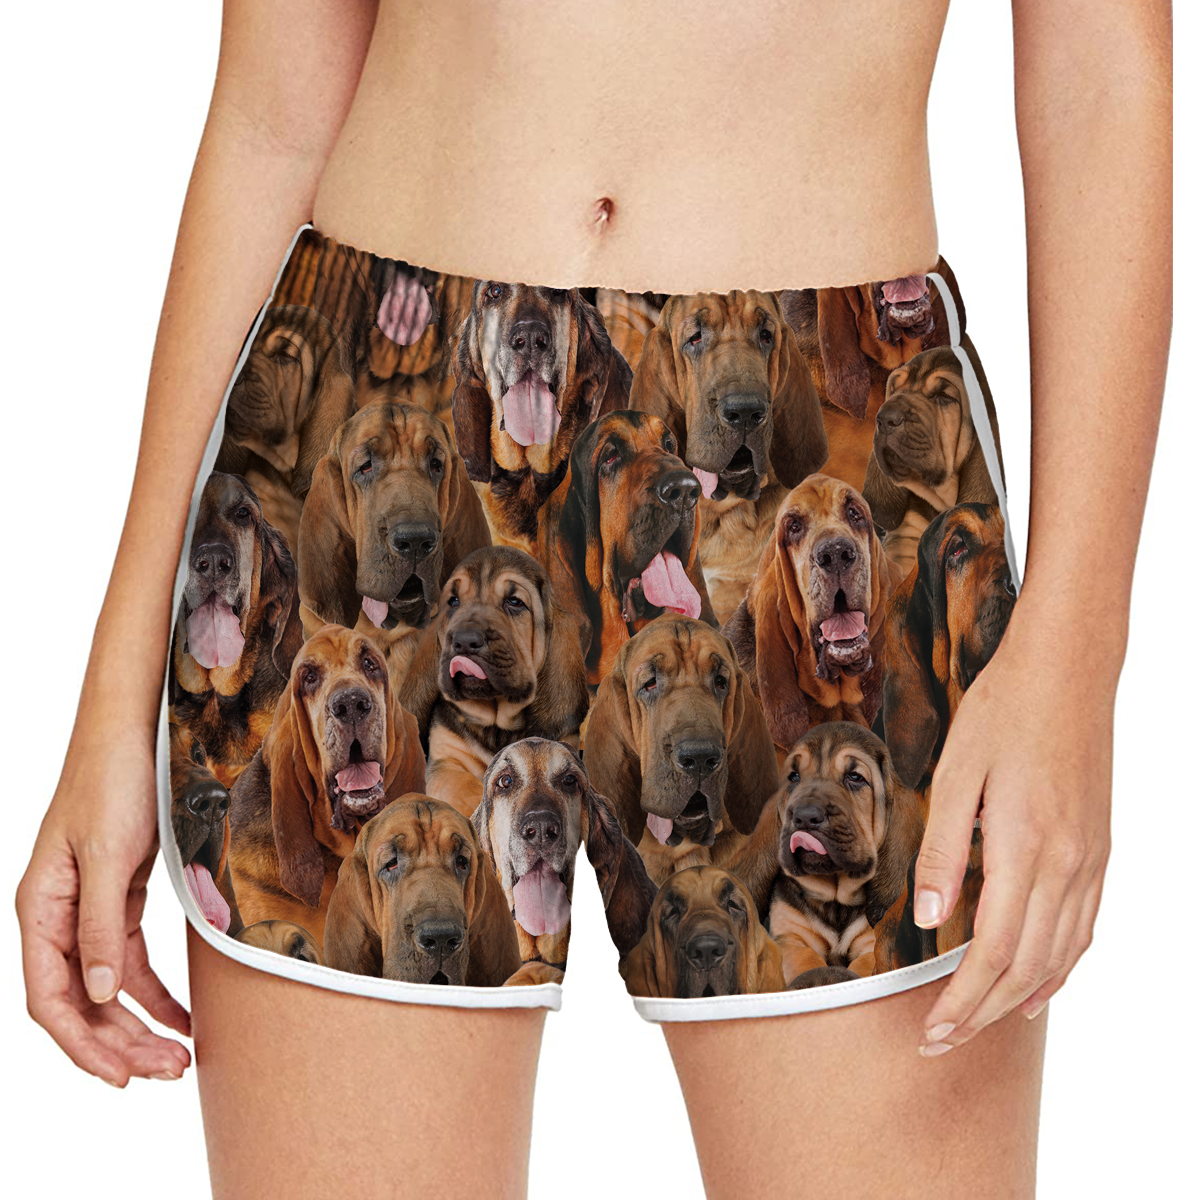 You Will Have A Bunch Of Bloodhounds - Women's Running Shorts V1